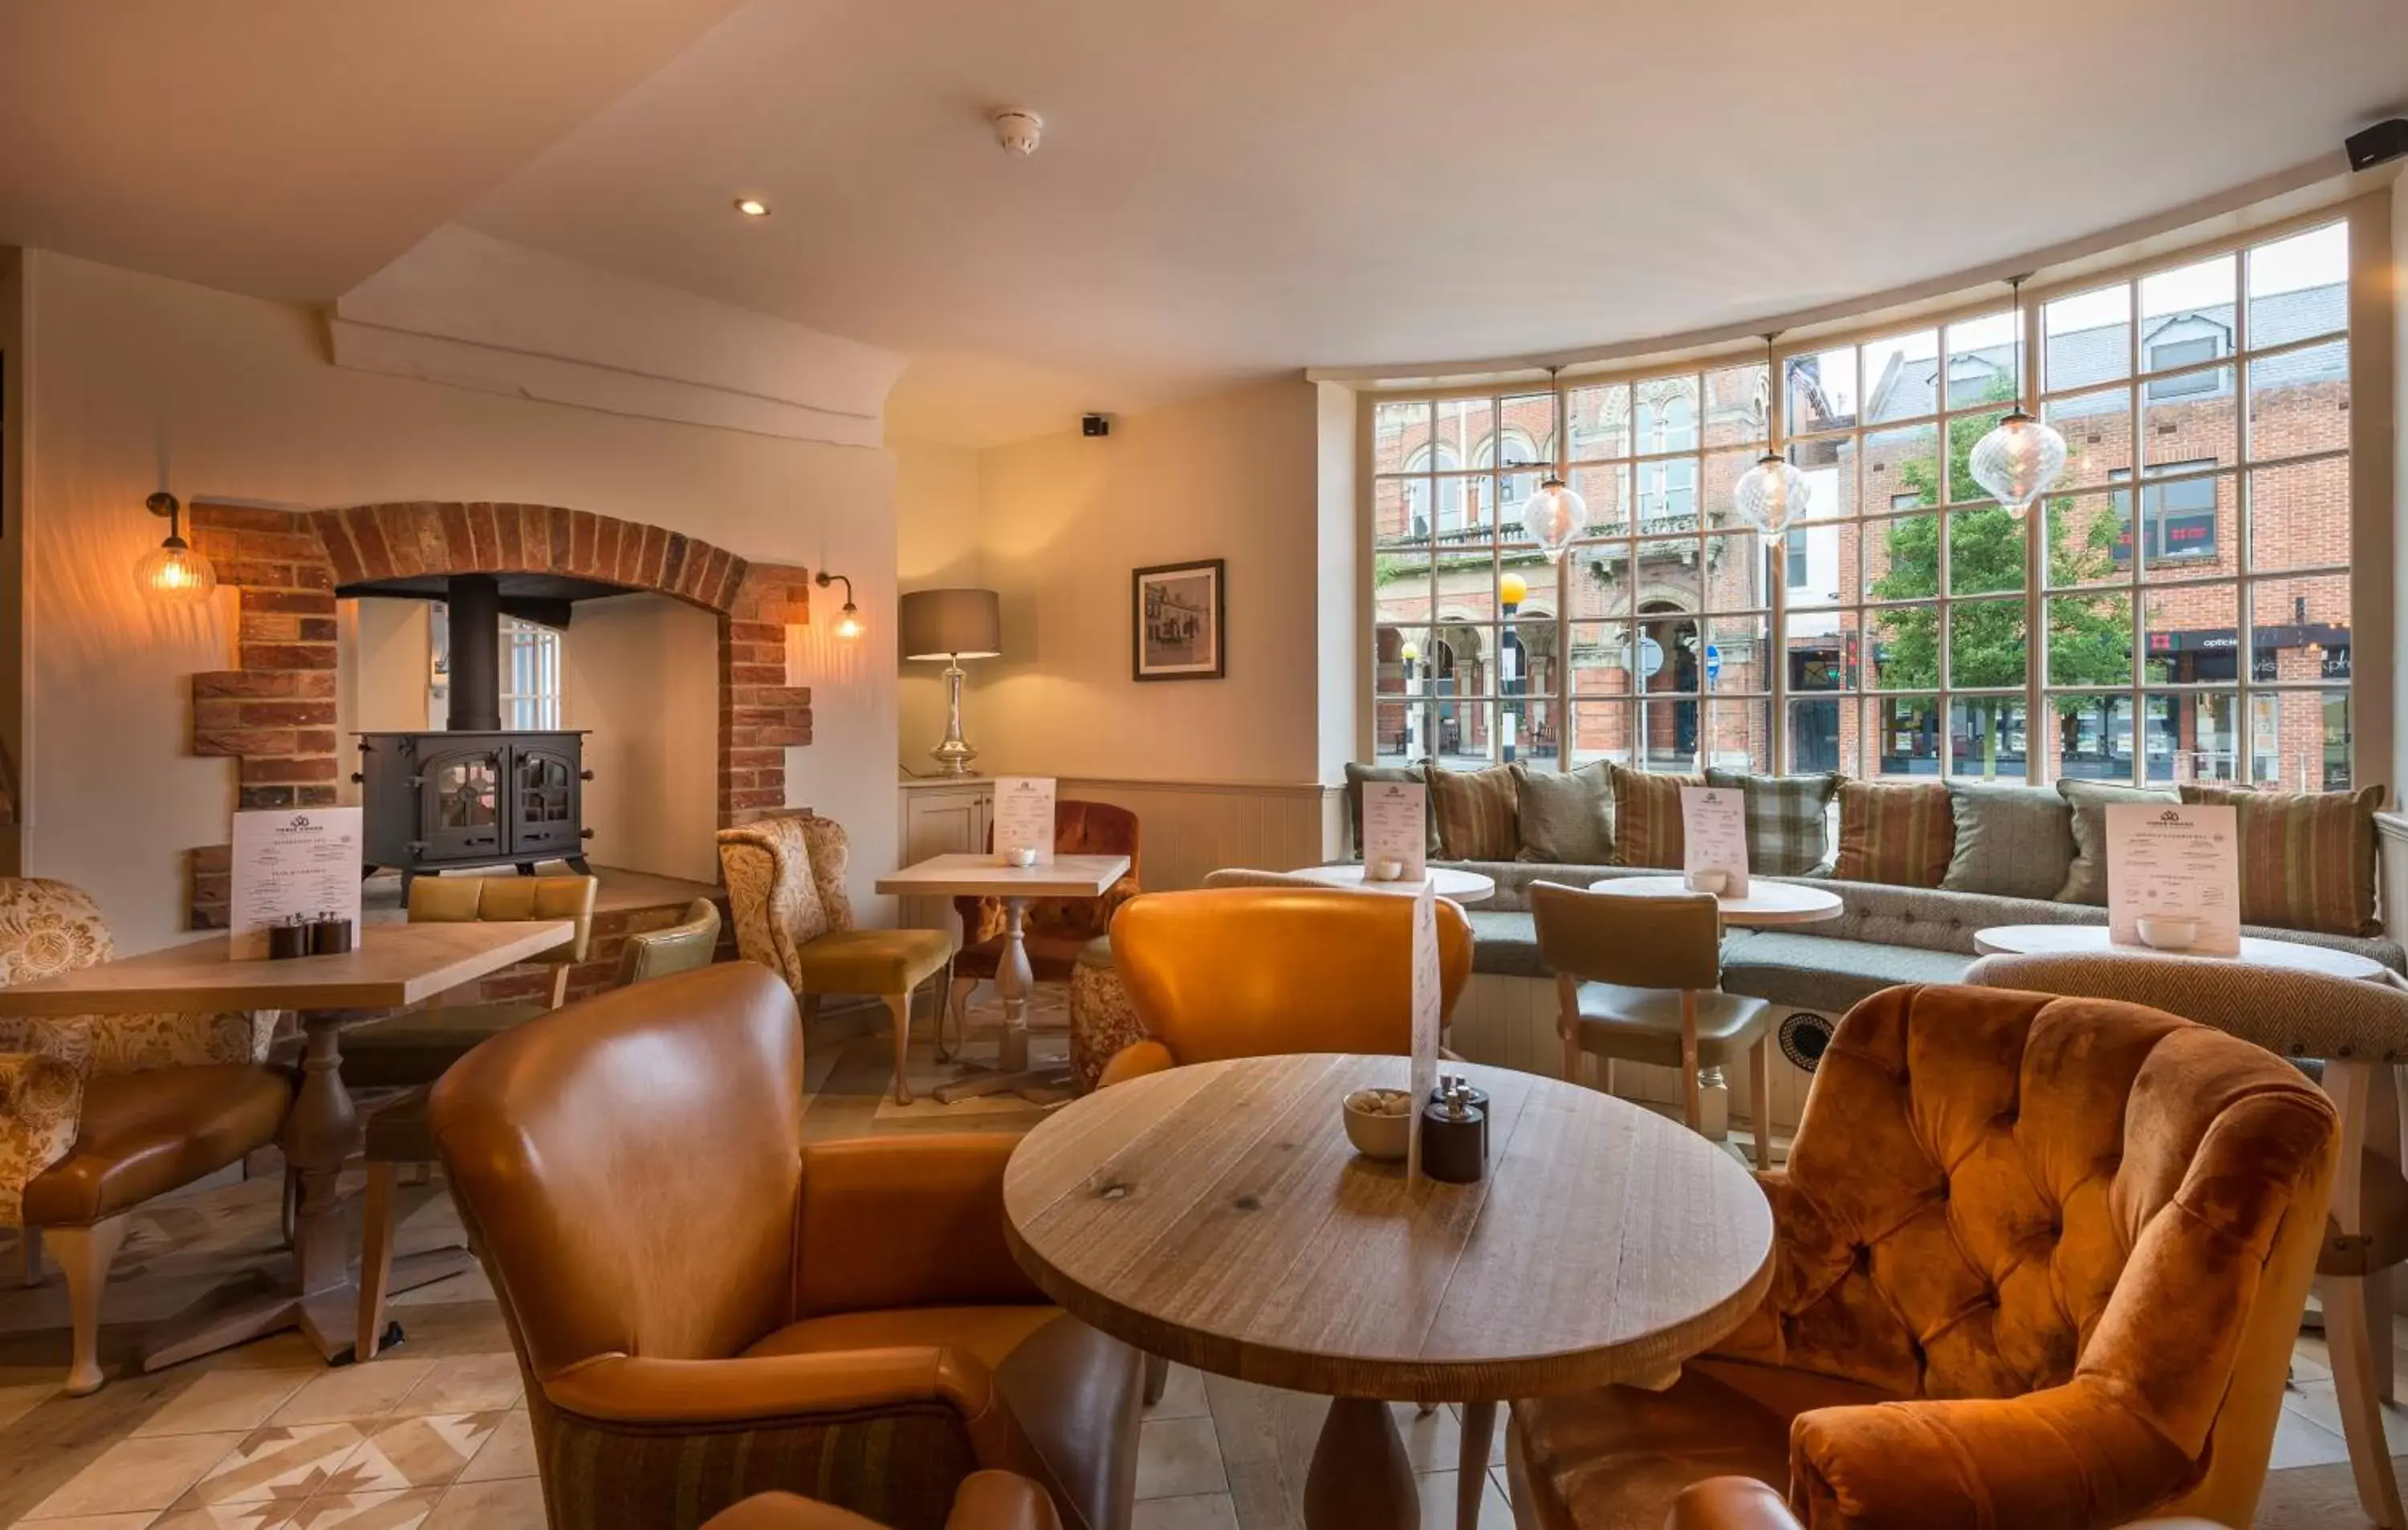 Lounge/Bar in The Three Swans Hotel, Hungerford, Berkshire